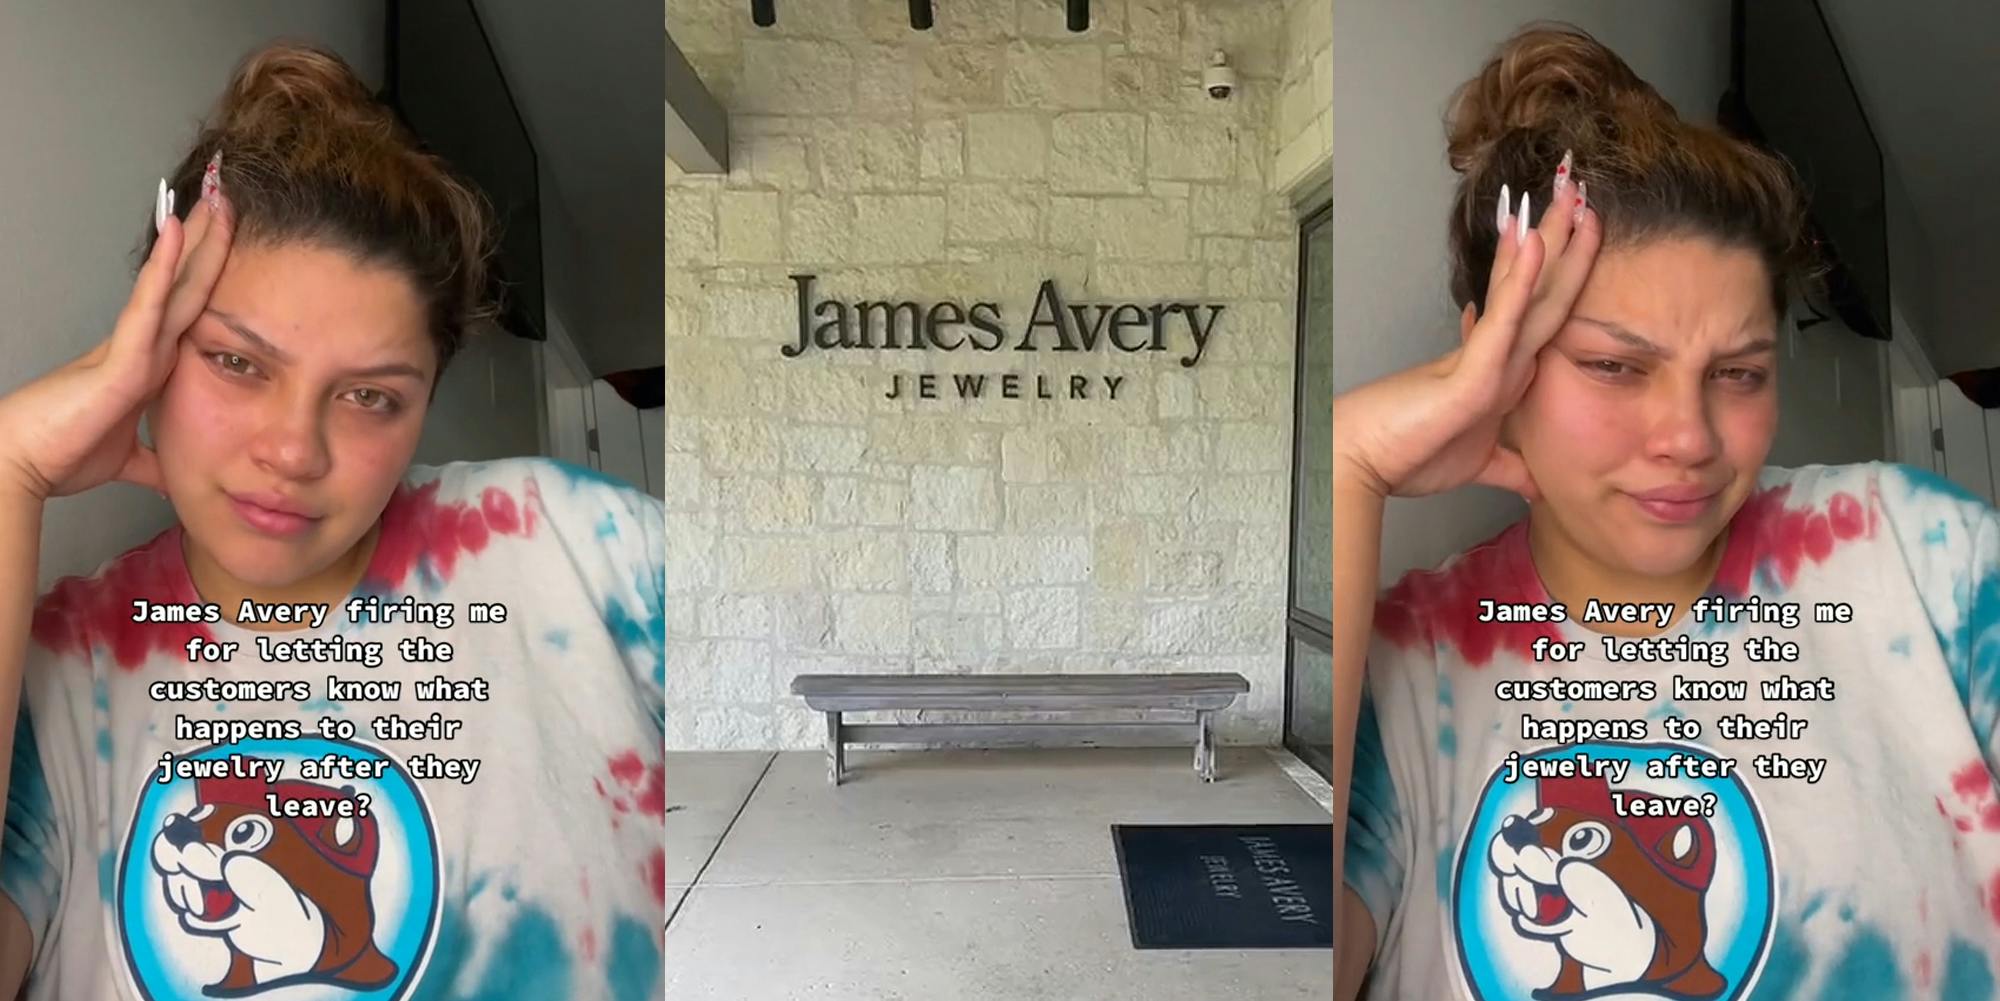 former James Avery employee with caption "James Avery firing me for letting the customers know what happens to their jewelry after they leave?" (l) James Avery Jewelry entrance with sign (c) former James Avery employee with caption "James Avery firing me for letting the customers know what happens to their jewelry after they leave?" (r)